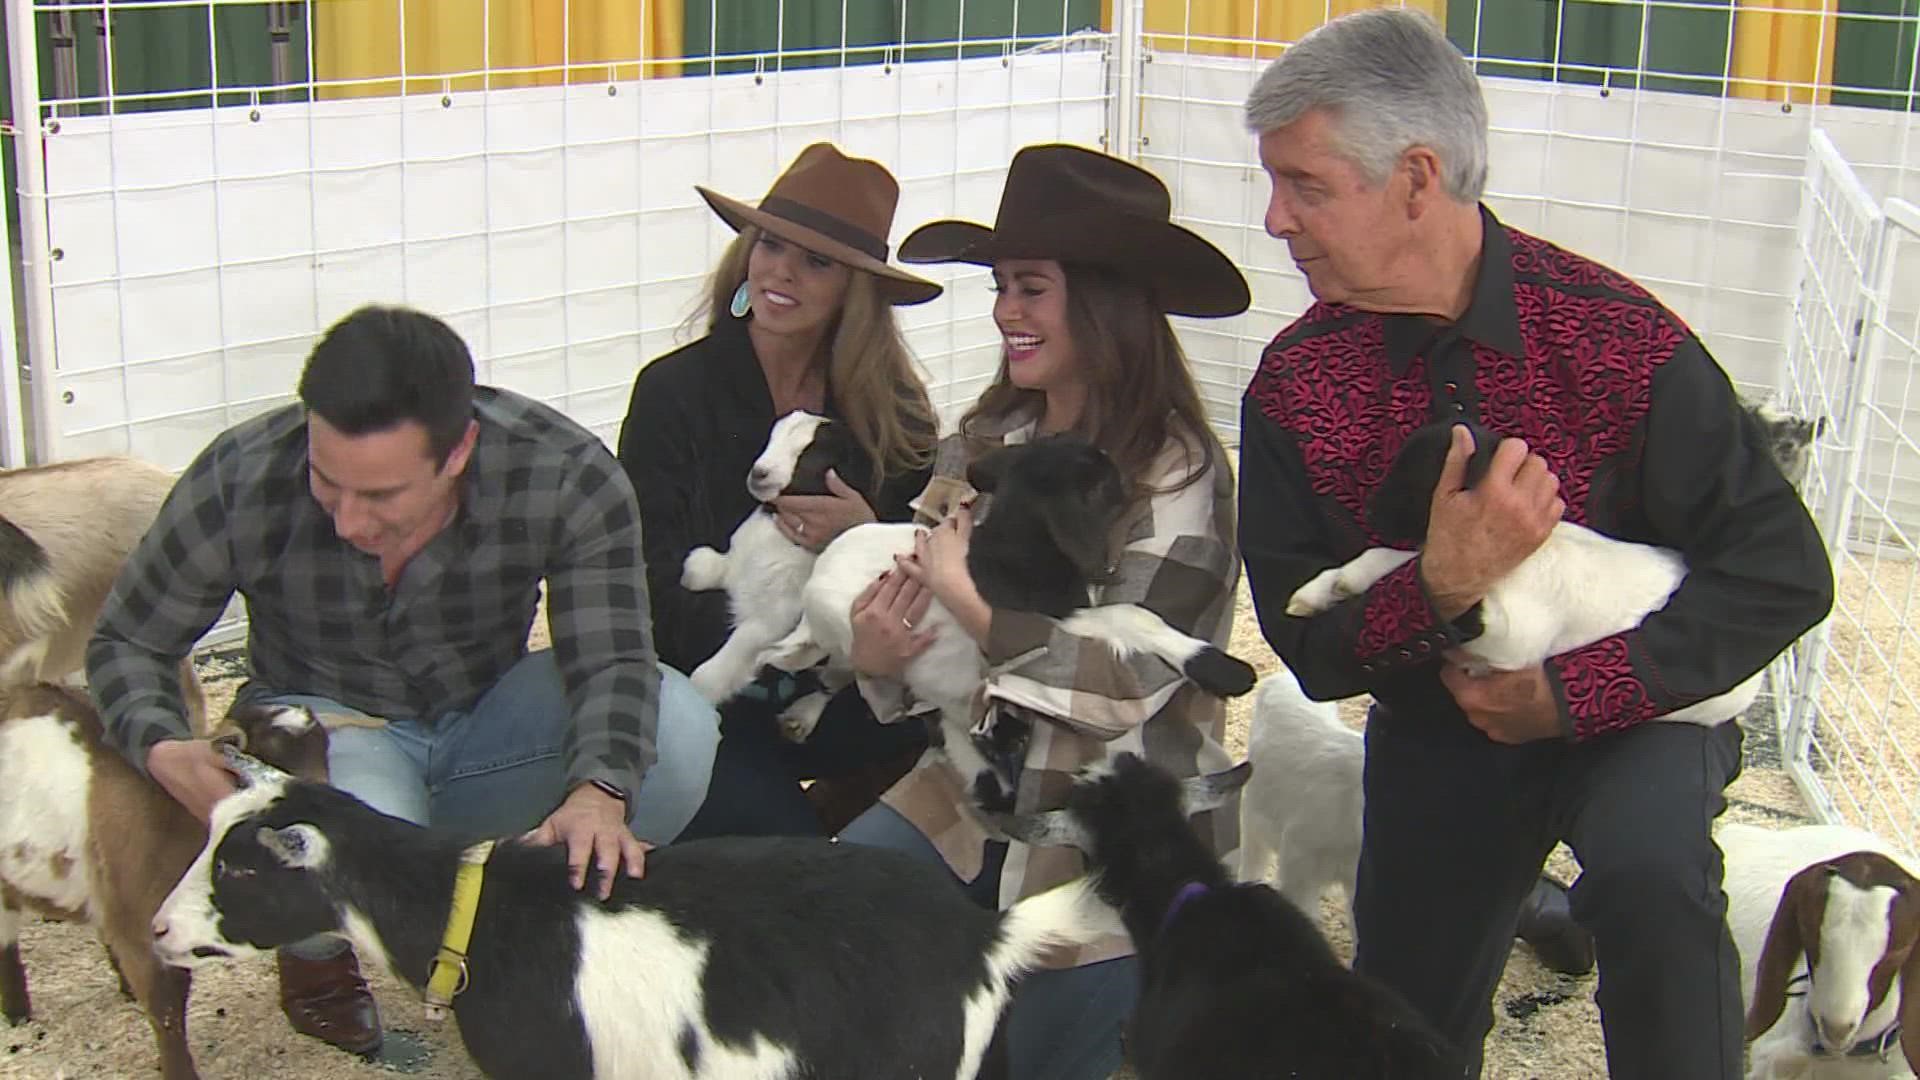 The 9NEWS Mornings team took a trip to the National Western Stock Show to check out some of the fun offerings happening this year.